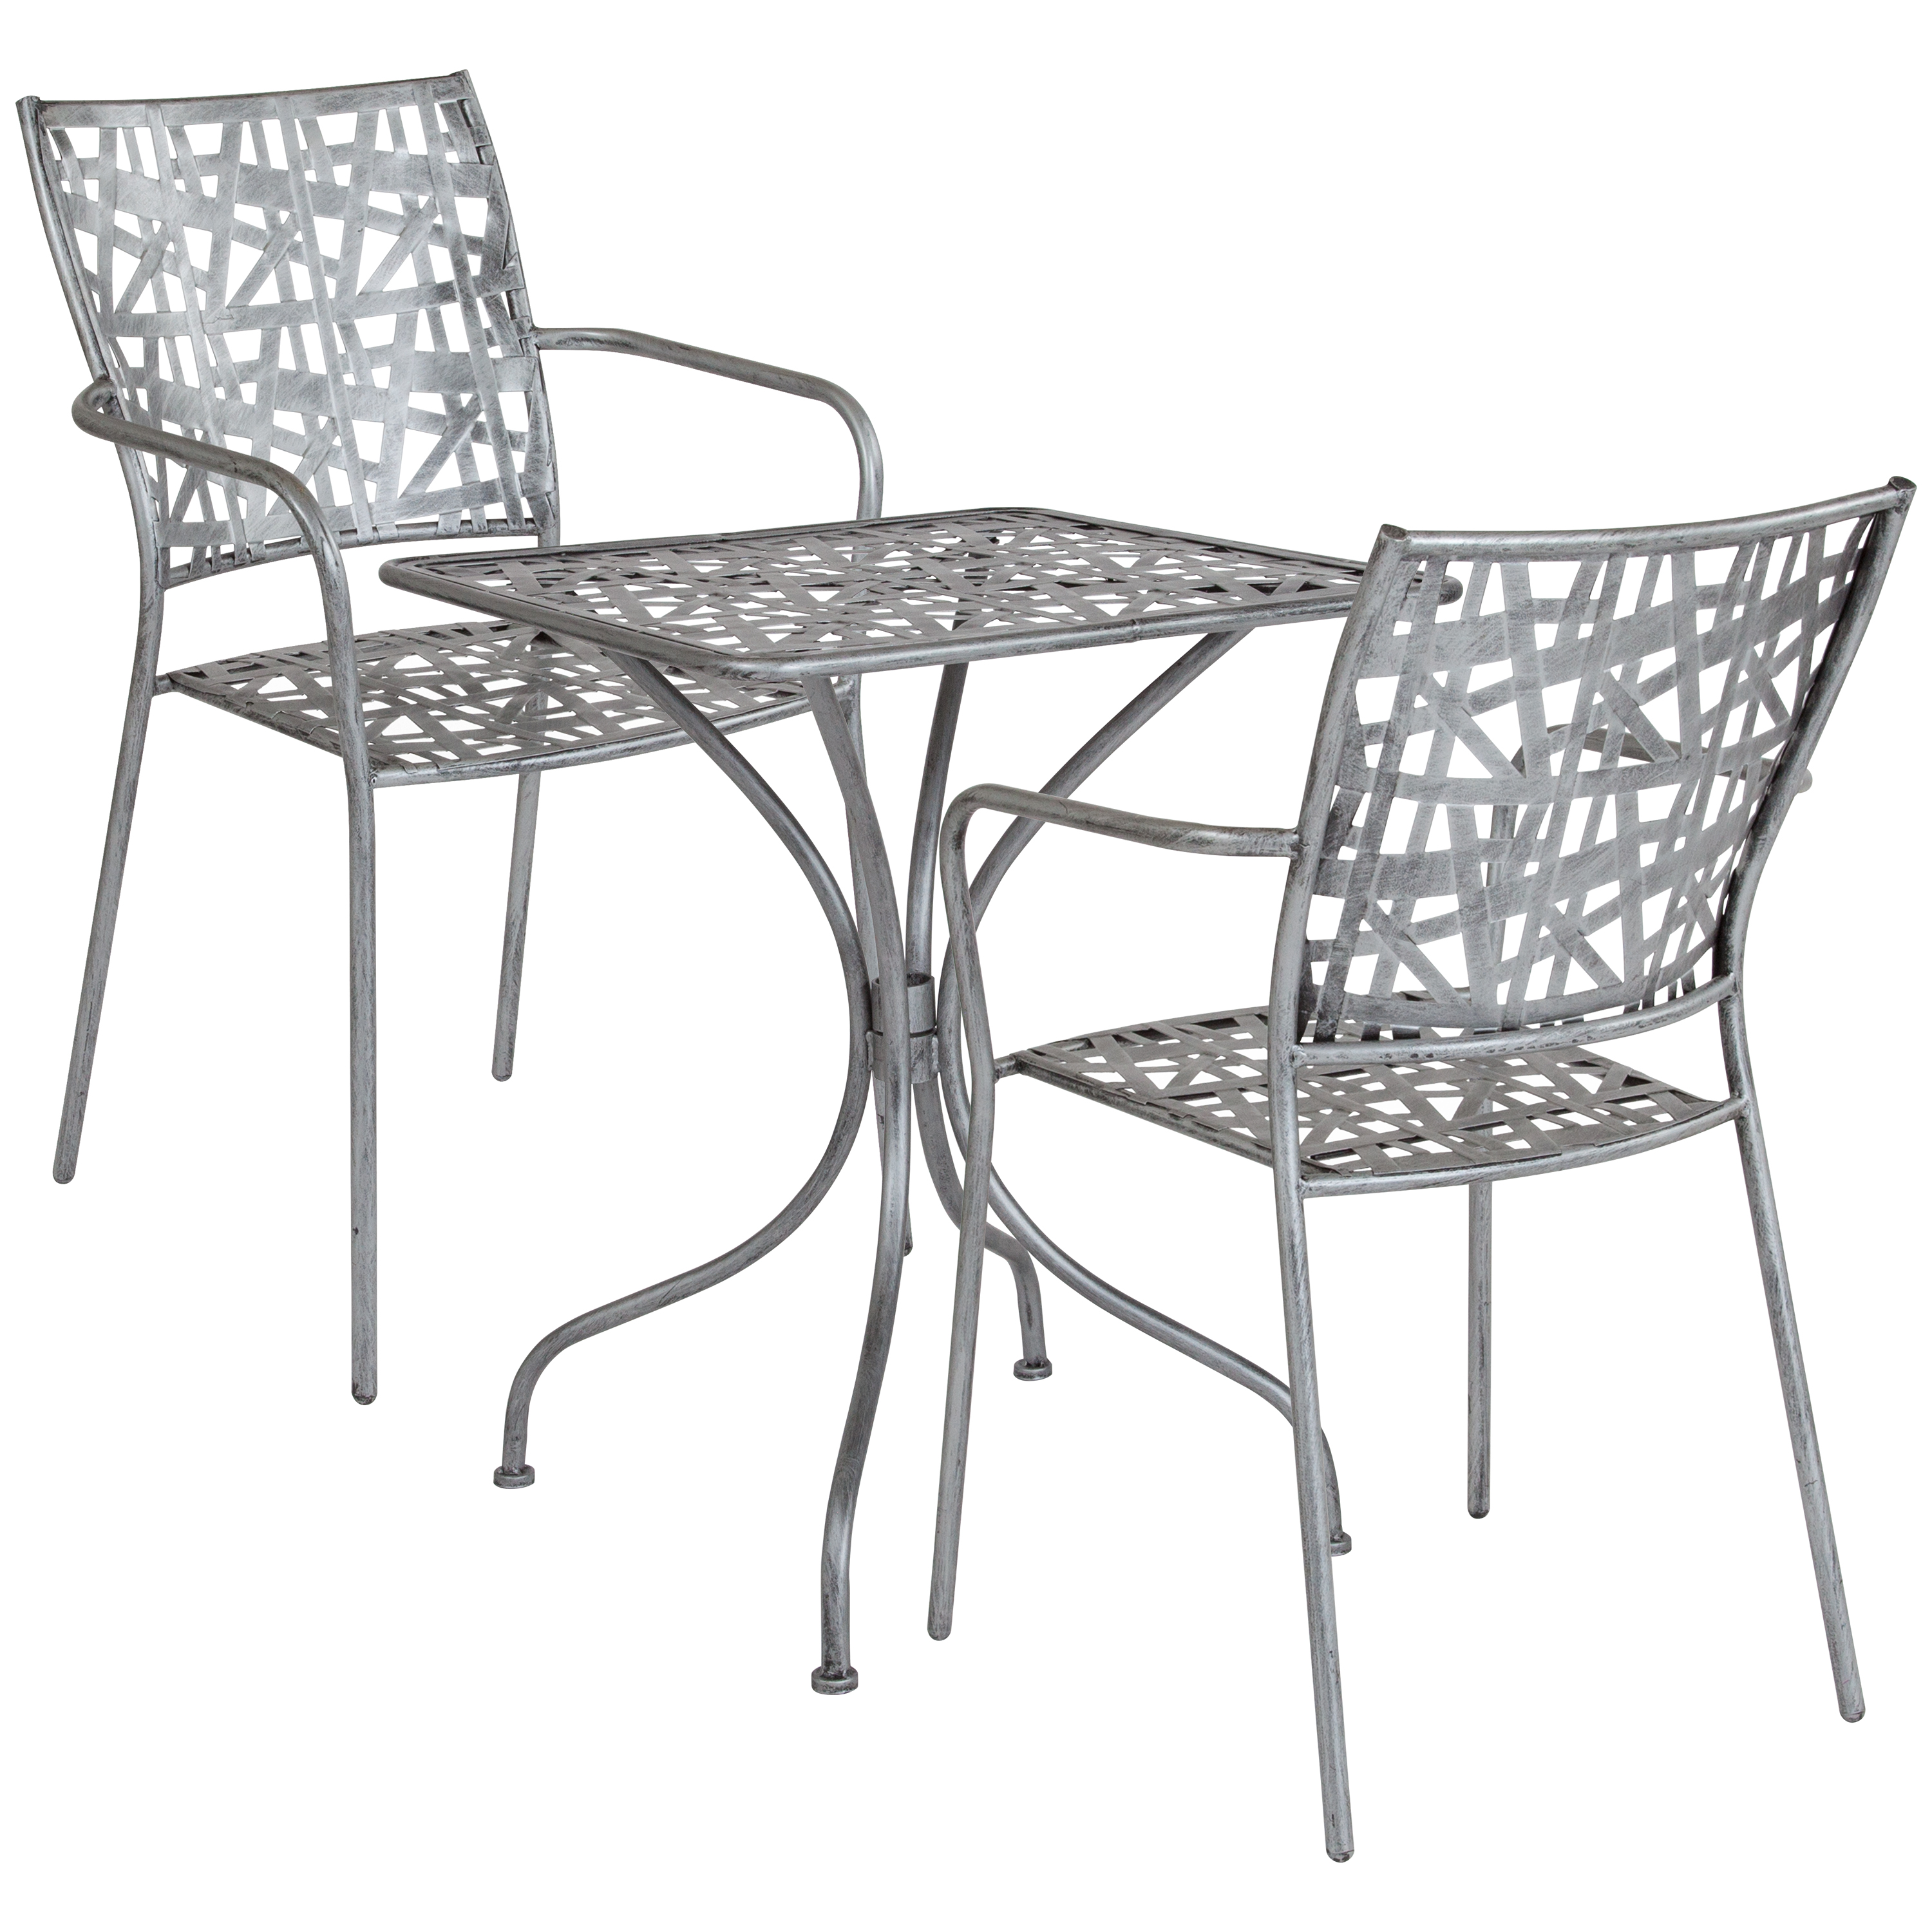 Agostina Series 23.5" Square Indoor-Outdoor Steel Patio Table with 2 Stack Chairs